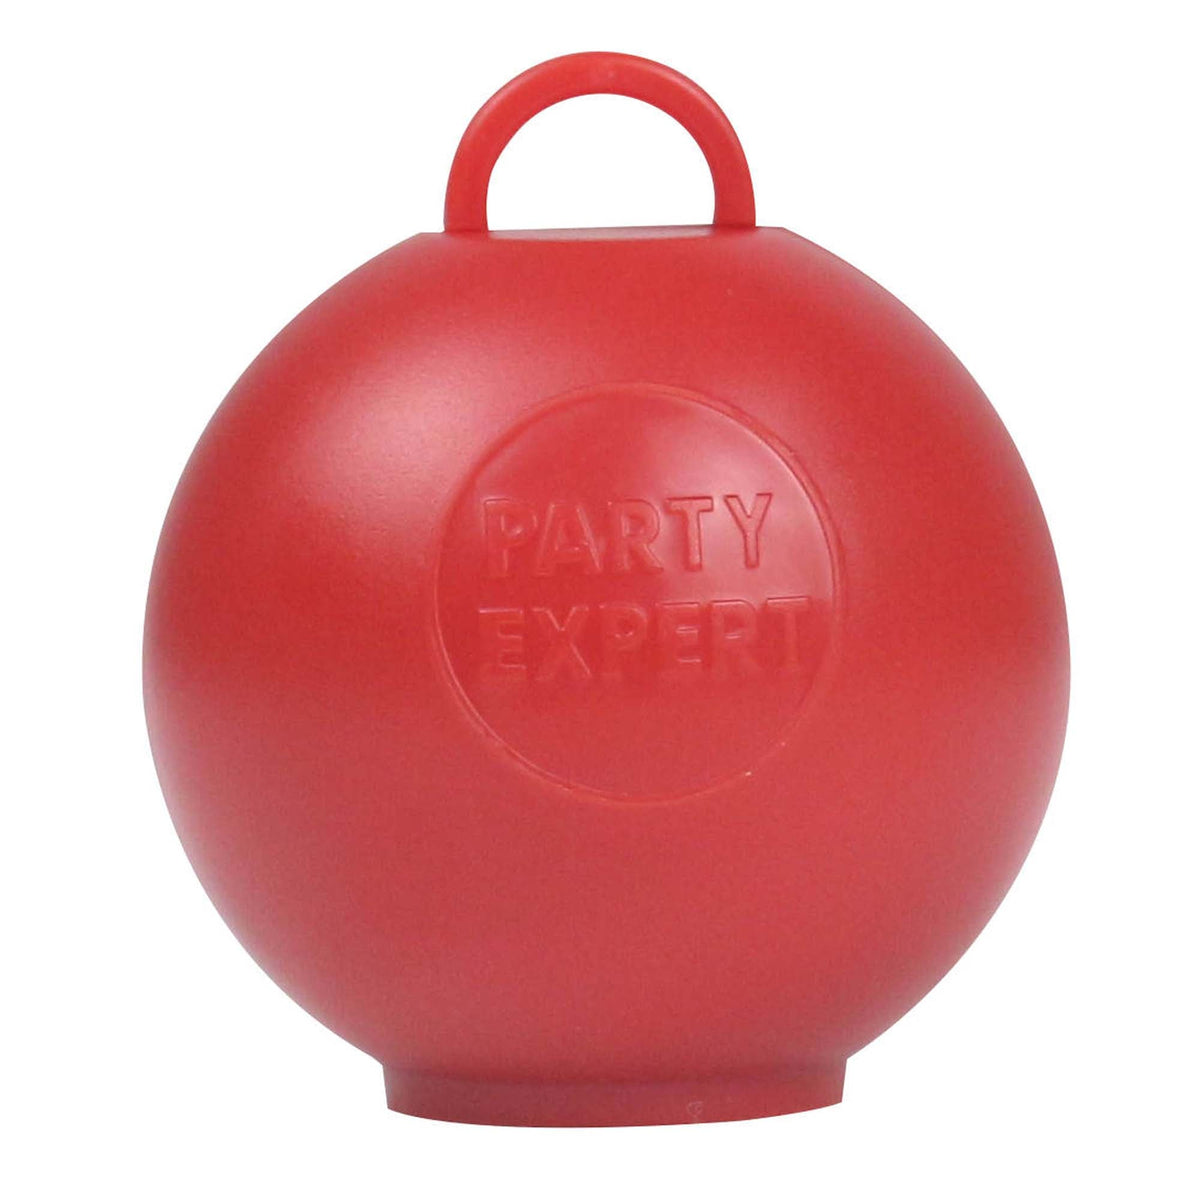 Dongguan Caipai Plastic Hardware Balloons Red Bubble Balloon Weight, 1 Count 810077659557